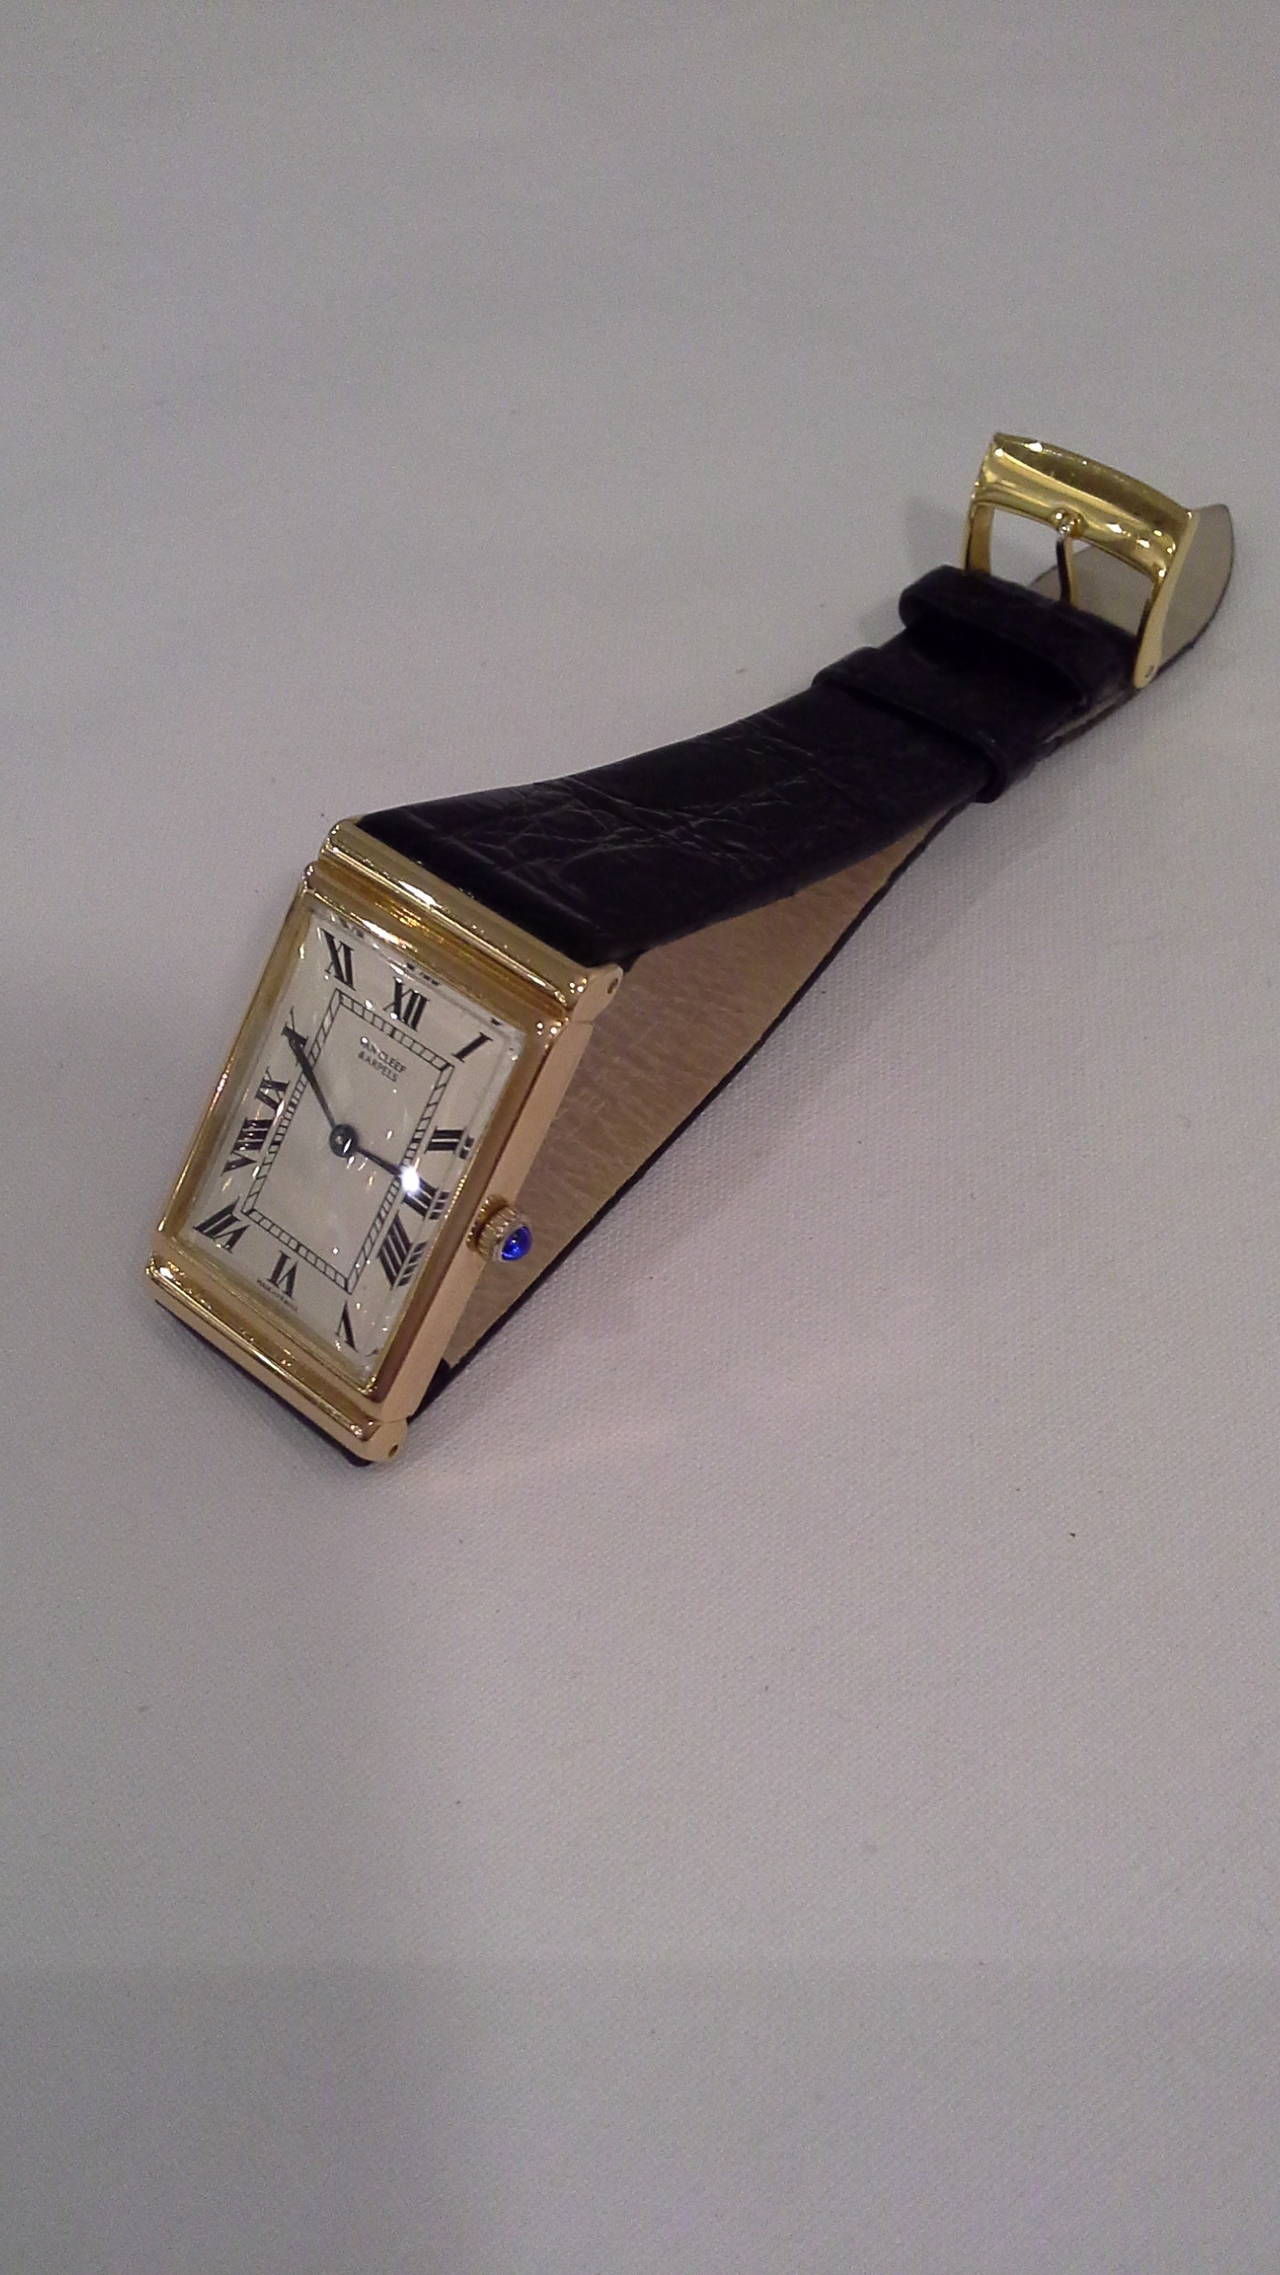 Van Cleef & Arpels 18k Yellow Gold Wristwatch with a Cabochon Sapphire Crown & hidden lugs. The watch is a 17 jewel manual wind movement marked A. Barthelay, unadjusted, Made in France, inside case is marked Alexis Barthelay, France.
The